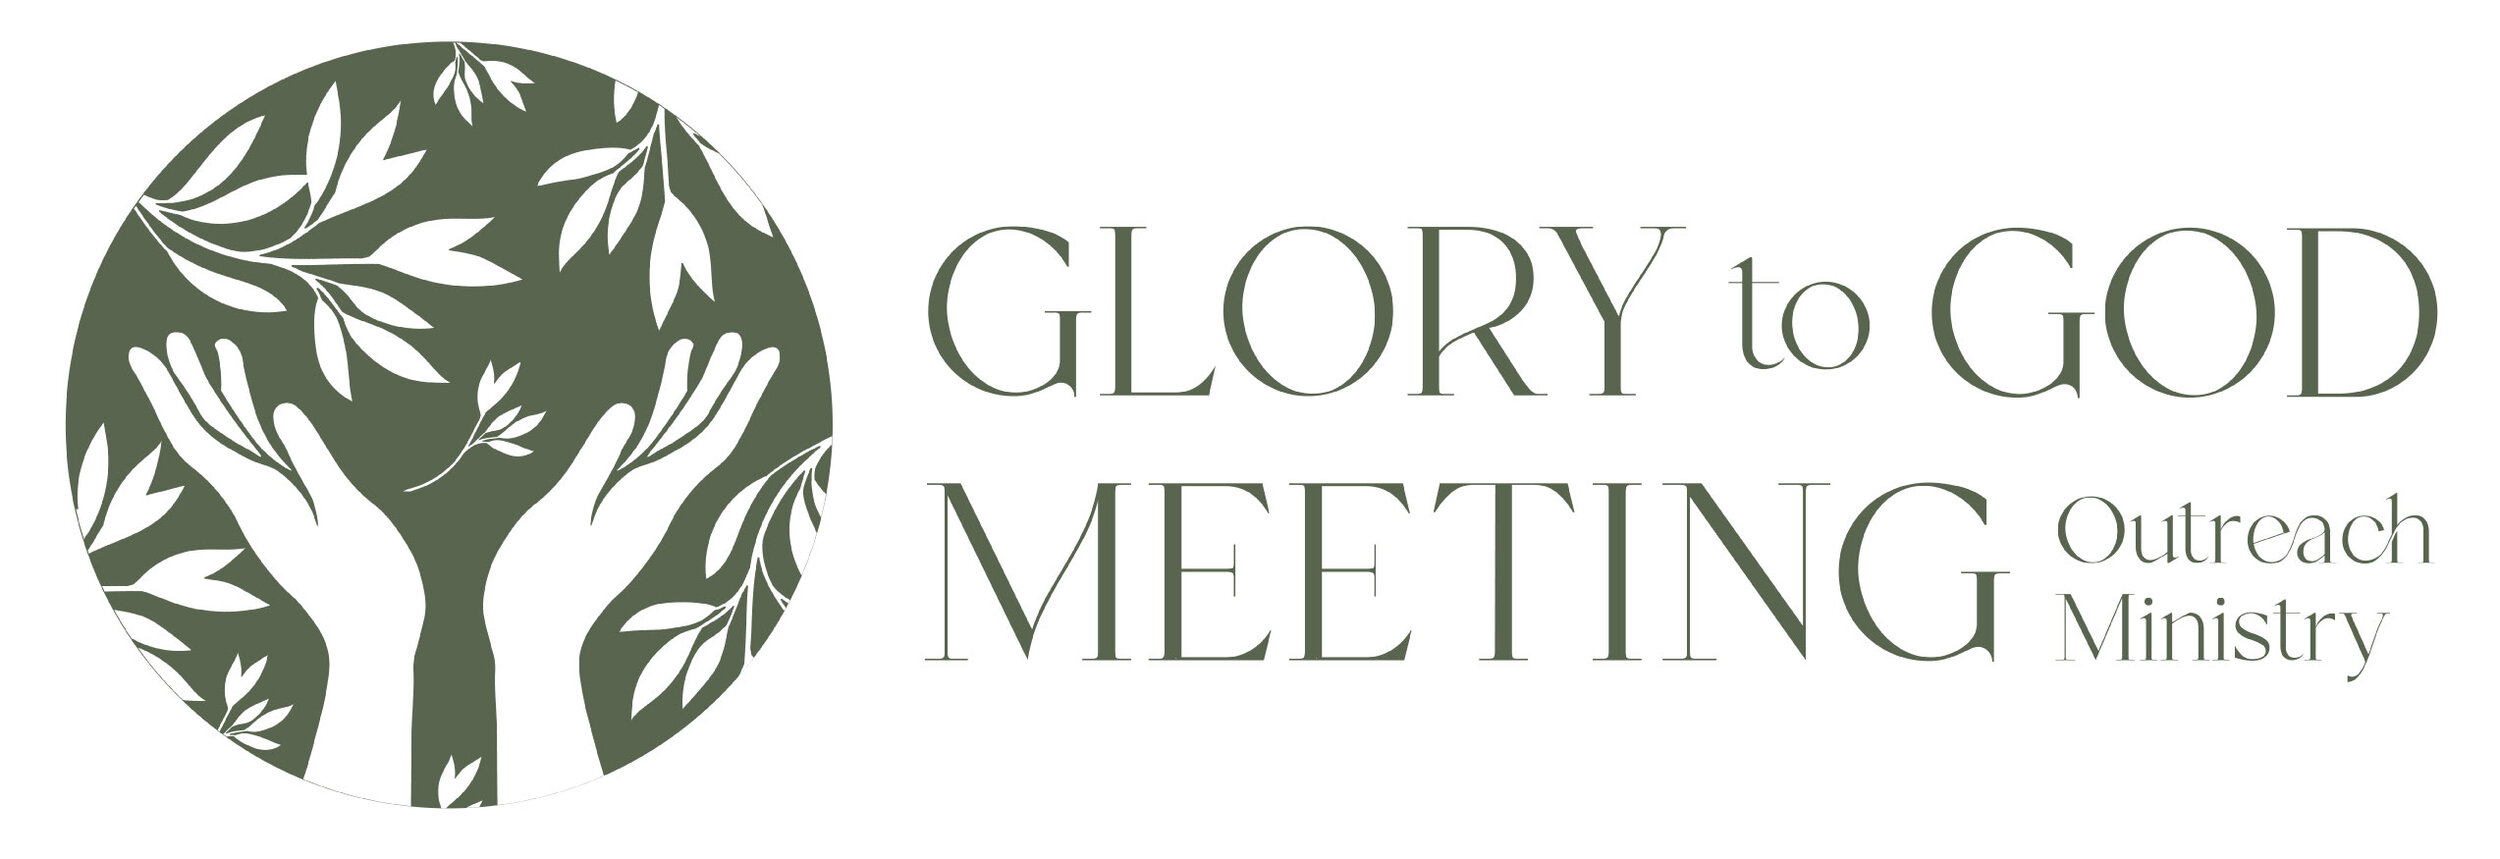 Glory to God Meeting Outreach Ministry